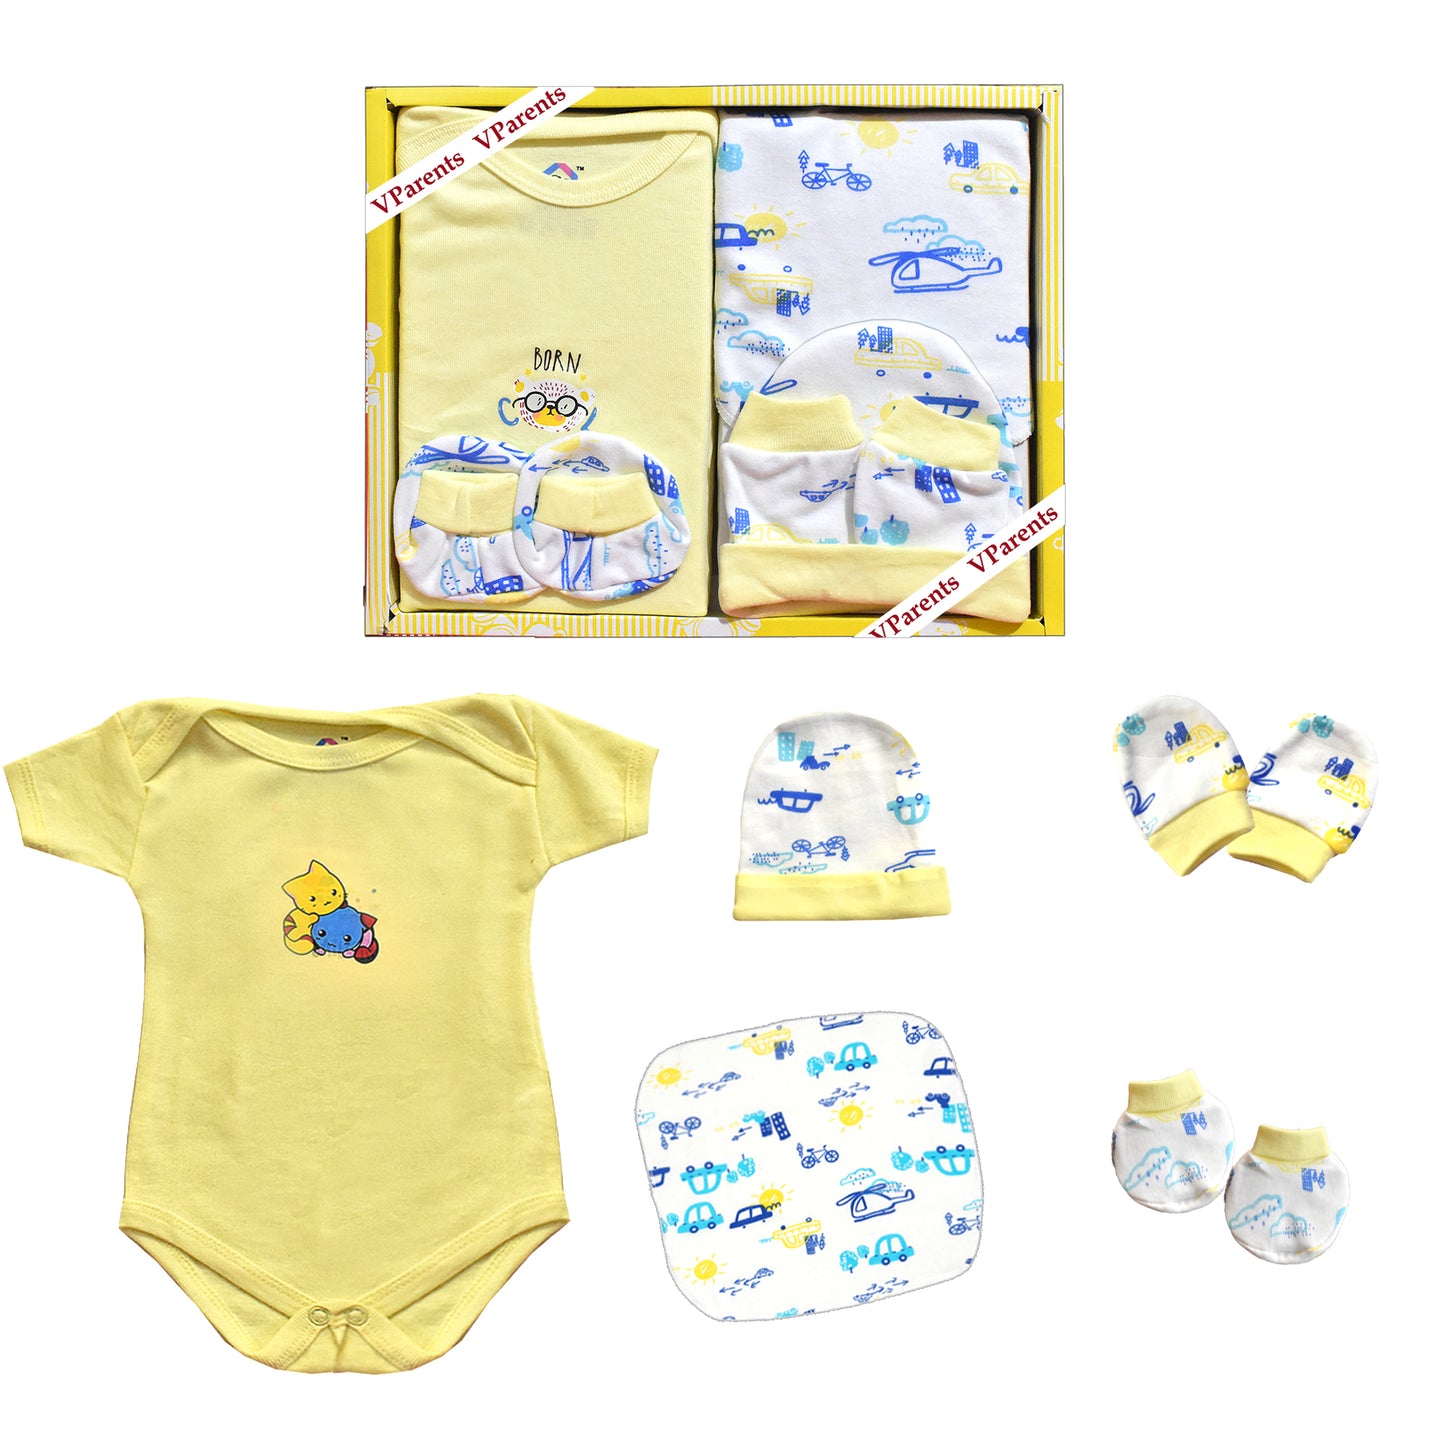 VParents Bitsy New Born Baby Gift Set (Pack of 5)